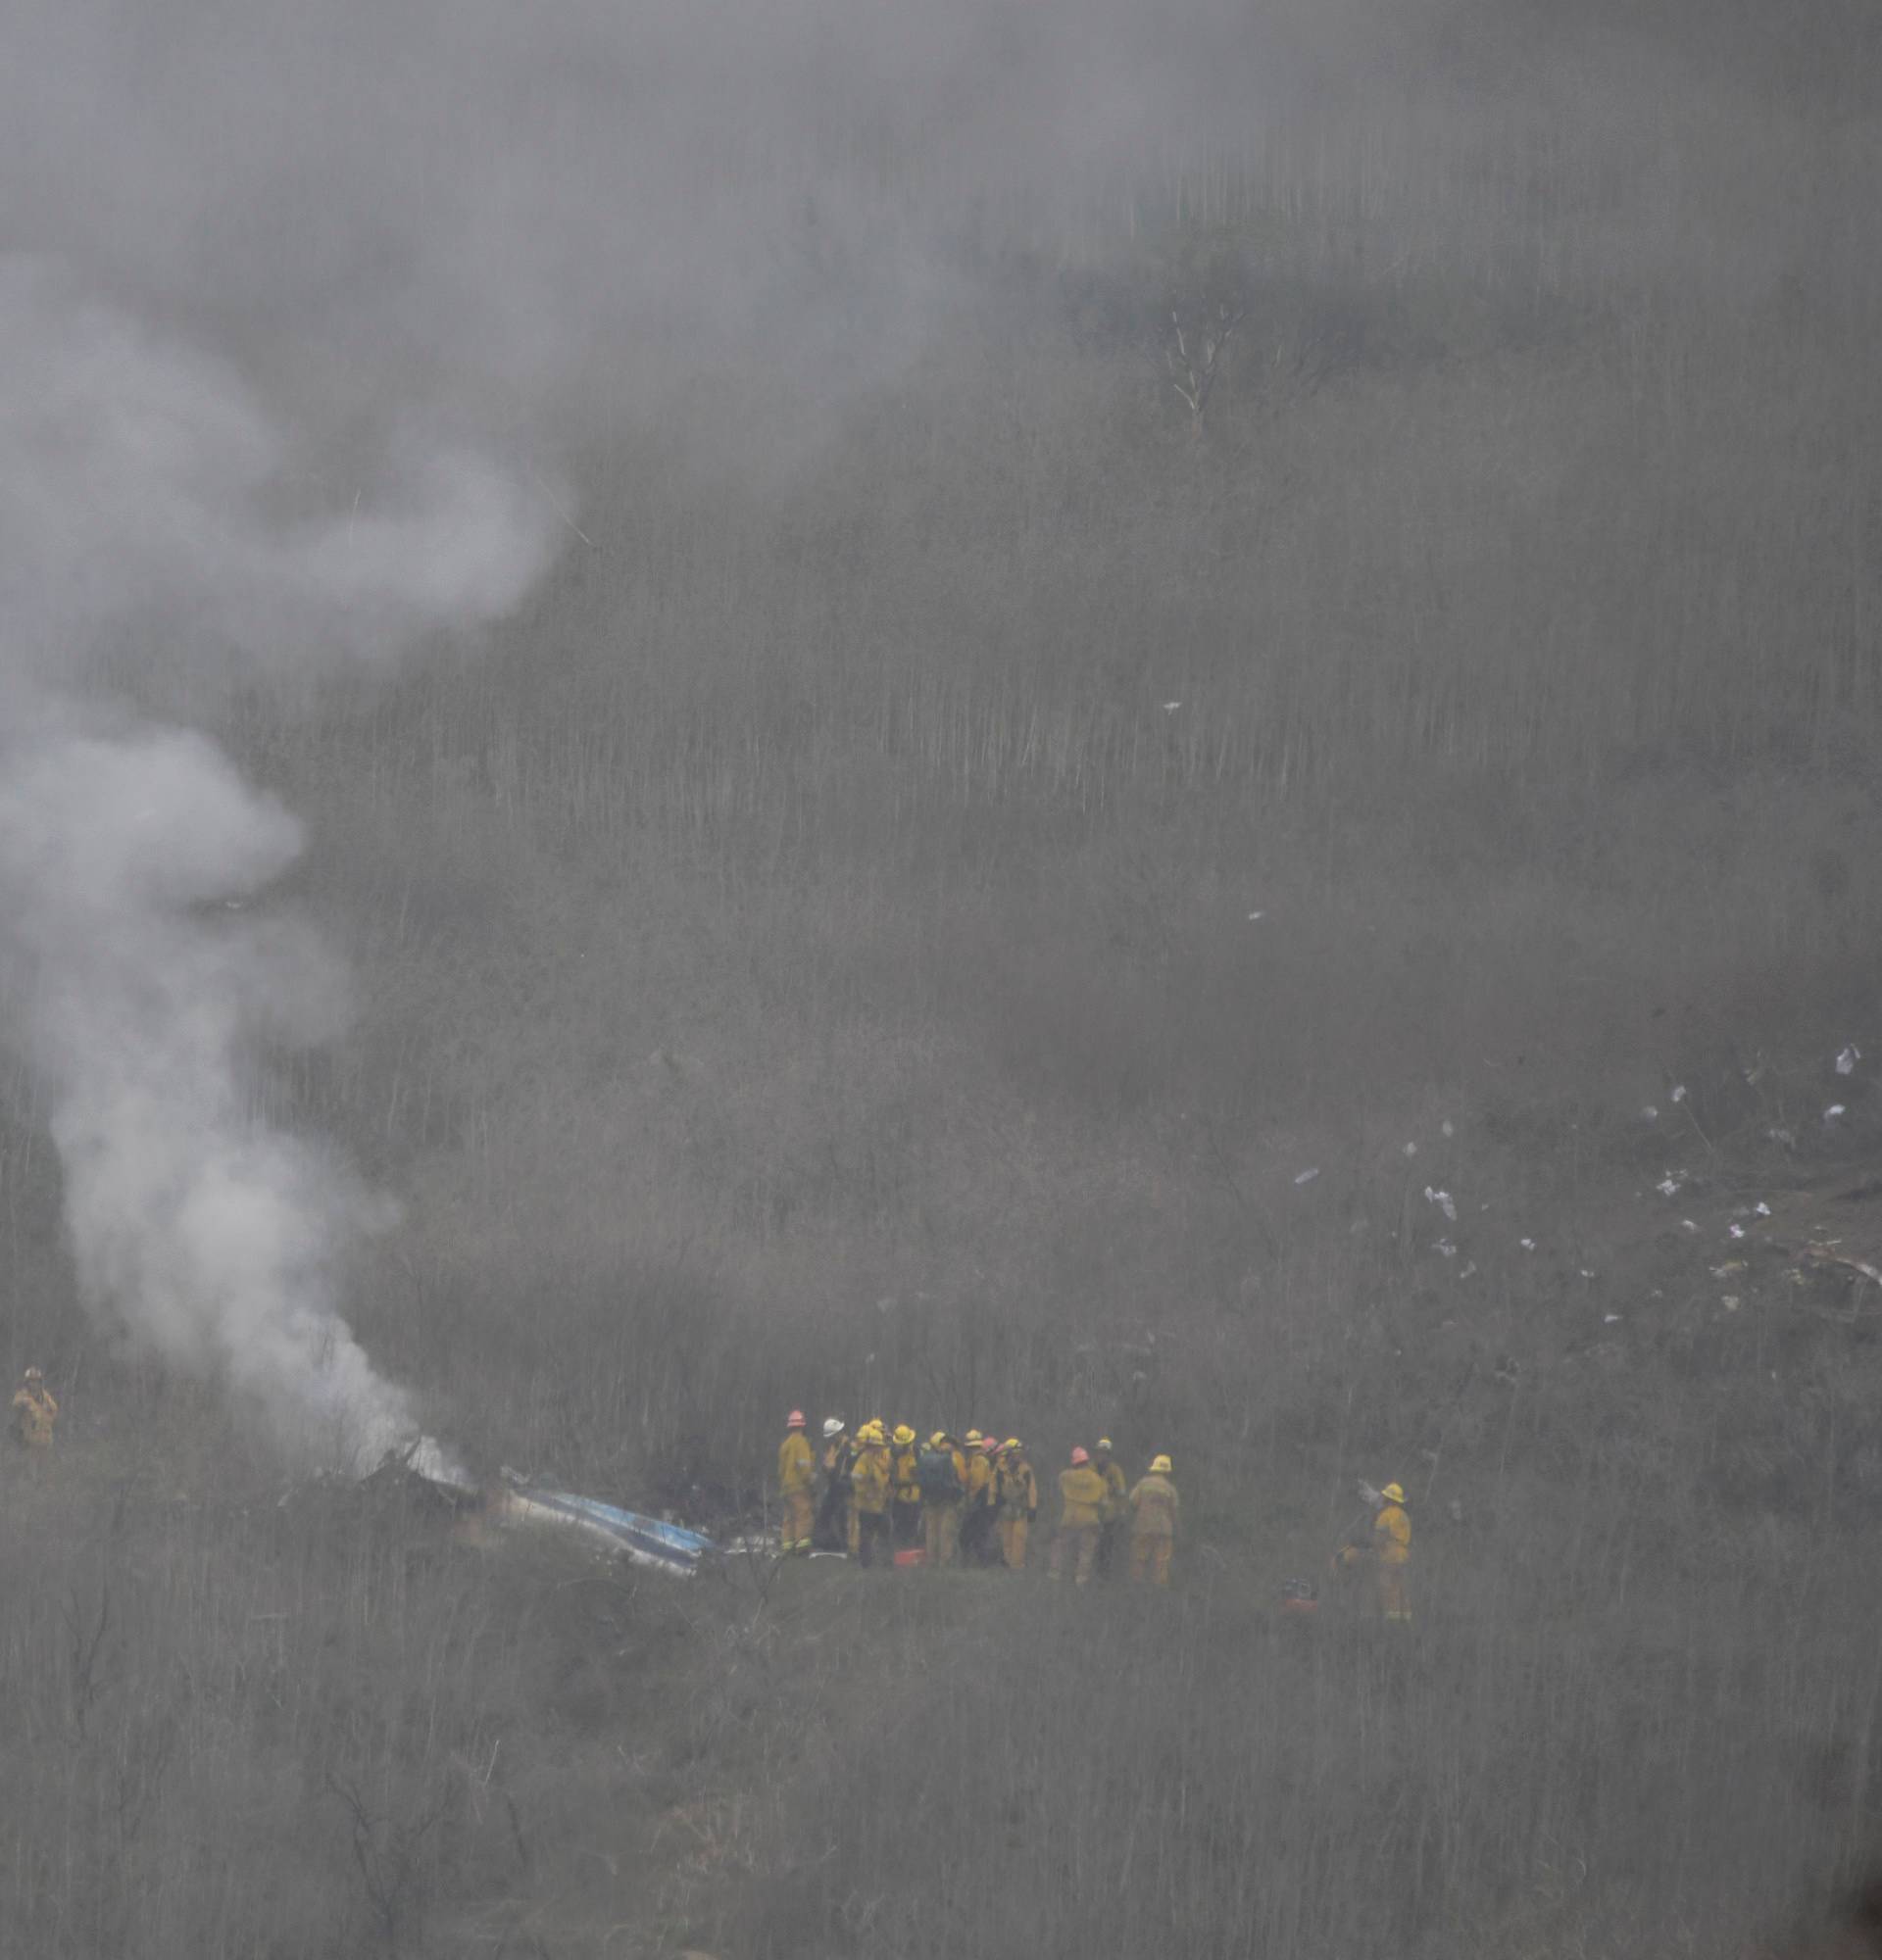 LA county firefighters work at the scene of a helicopter crash that reportedly killed Kobe Bryant in Calabasas